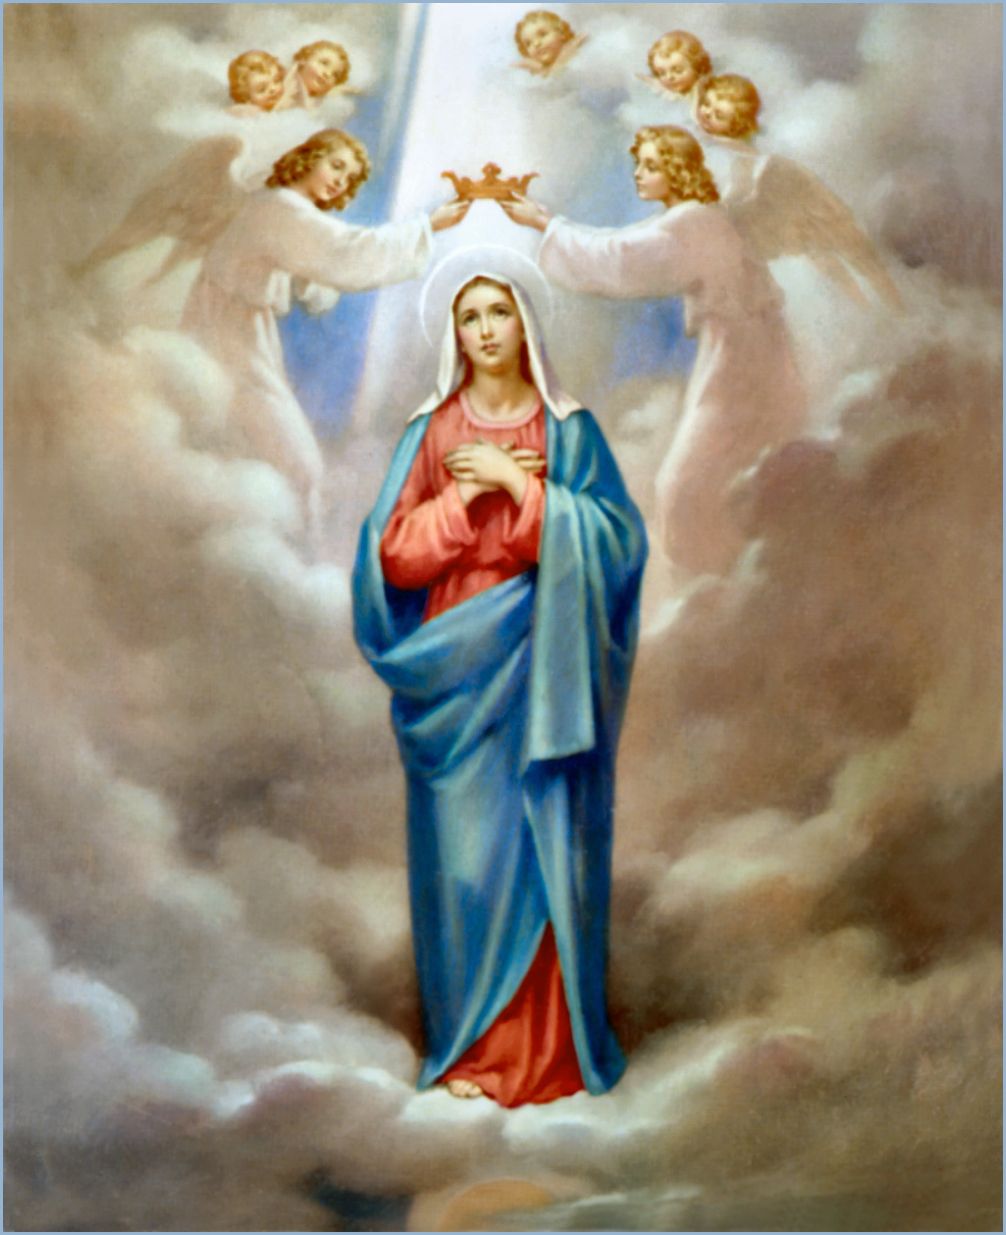 Mother Mary iPhone Wallpapers - Wallpaper Cave